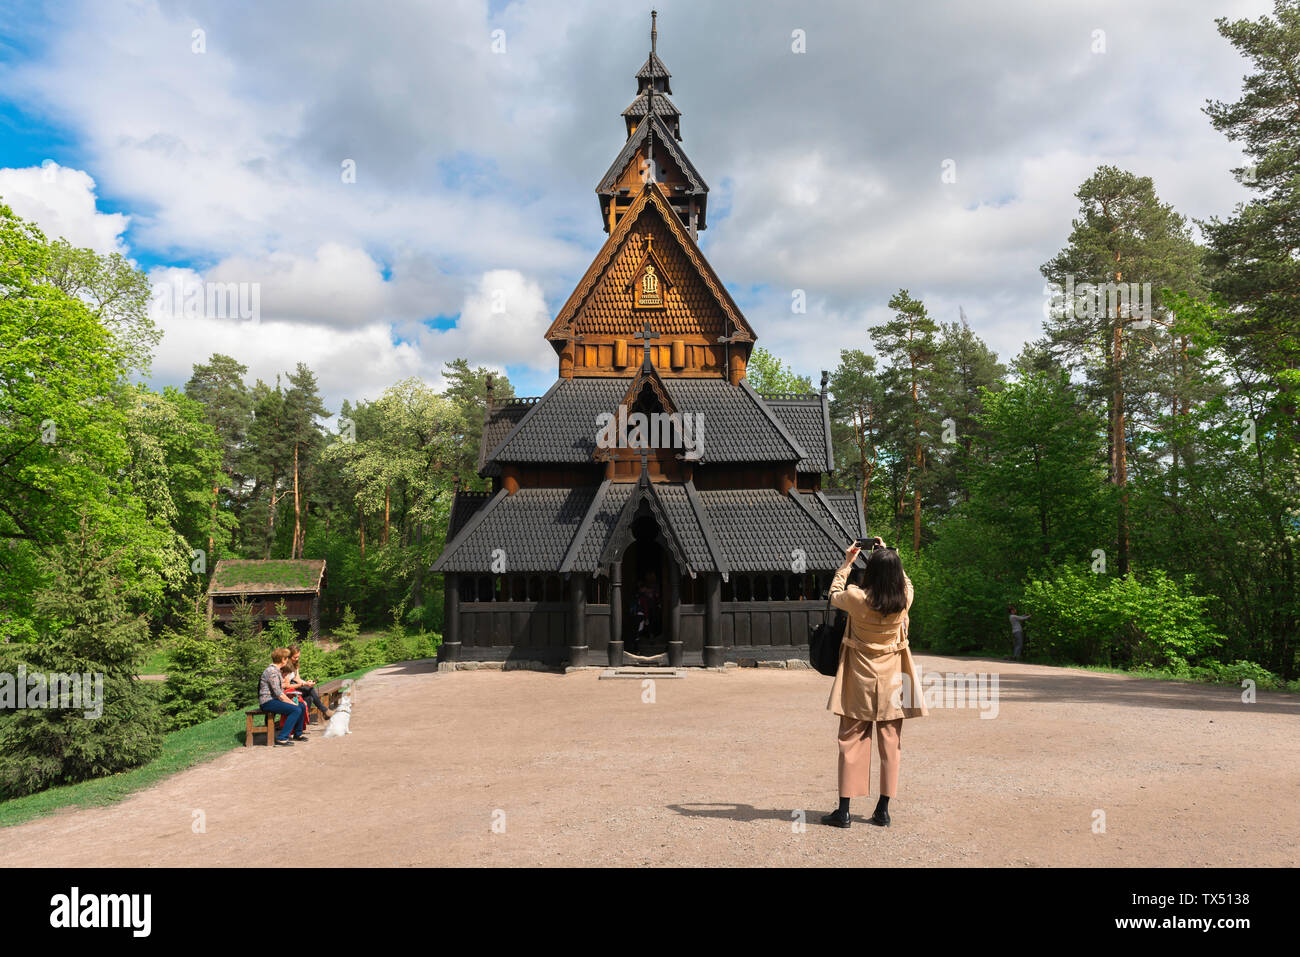 Norway Folk Museum, rear view of a female tourist taking a photo of a Norwegian stave church sited in the Norsk Folkemuseum in the Bygdøy area of Oslo. Stock Photo